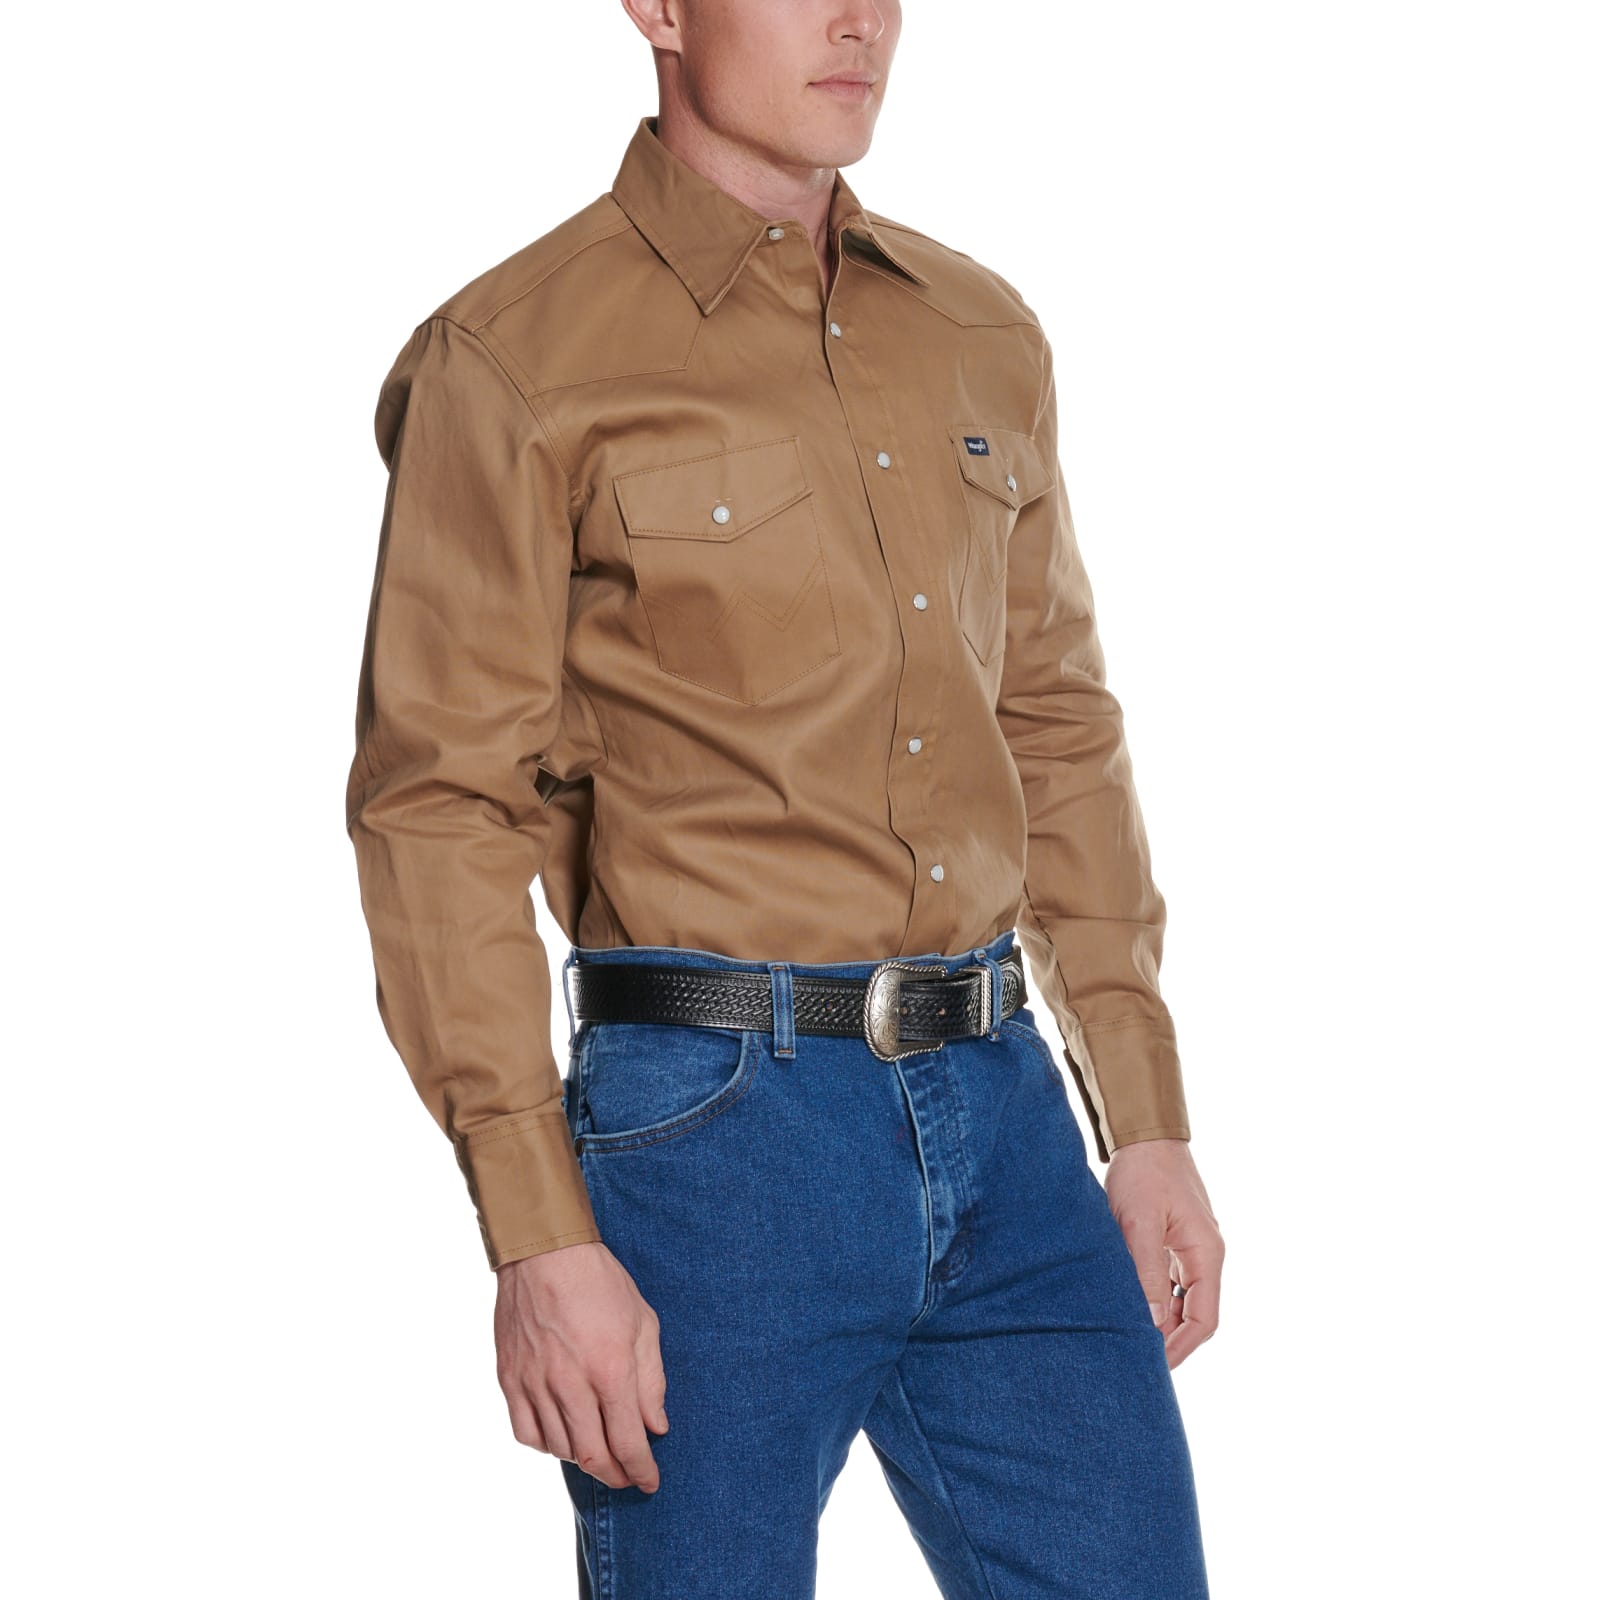 Wrangler Rawhide Long Sleeve Big & Tall Workshirt available at Cavenders